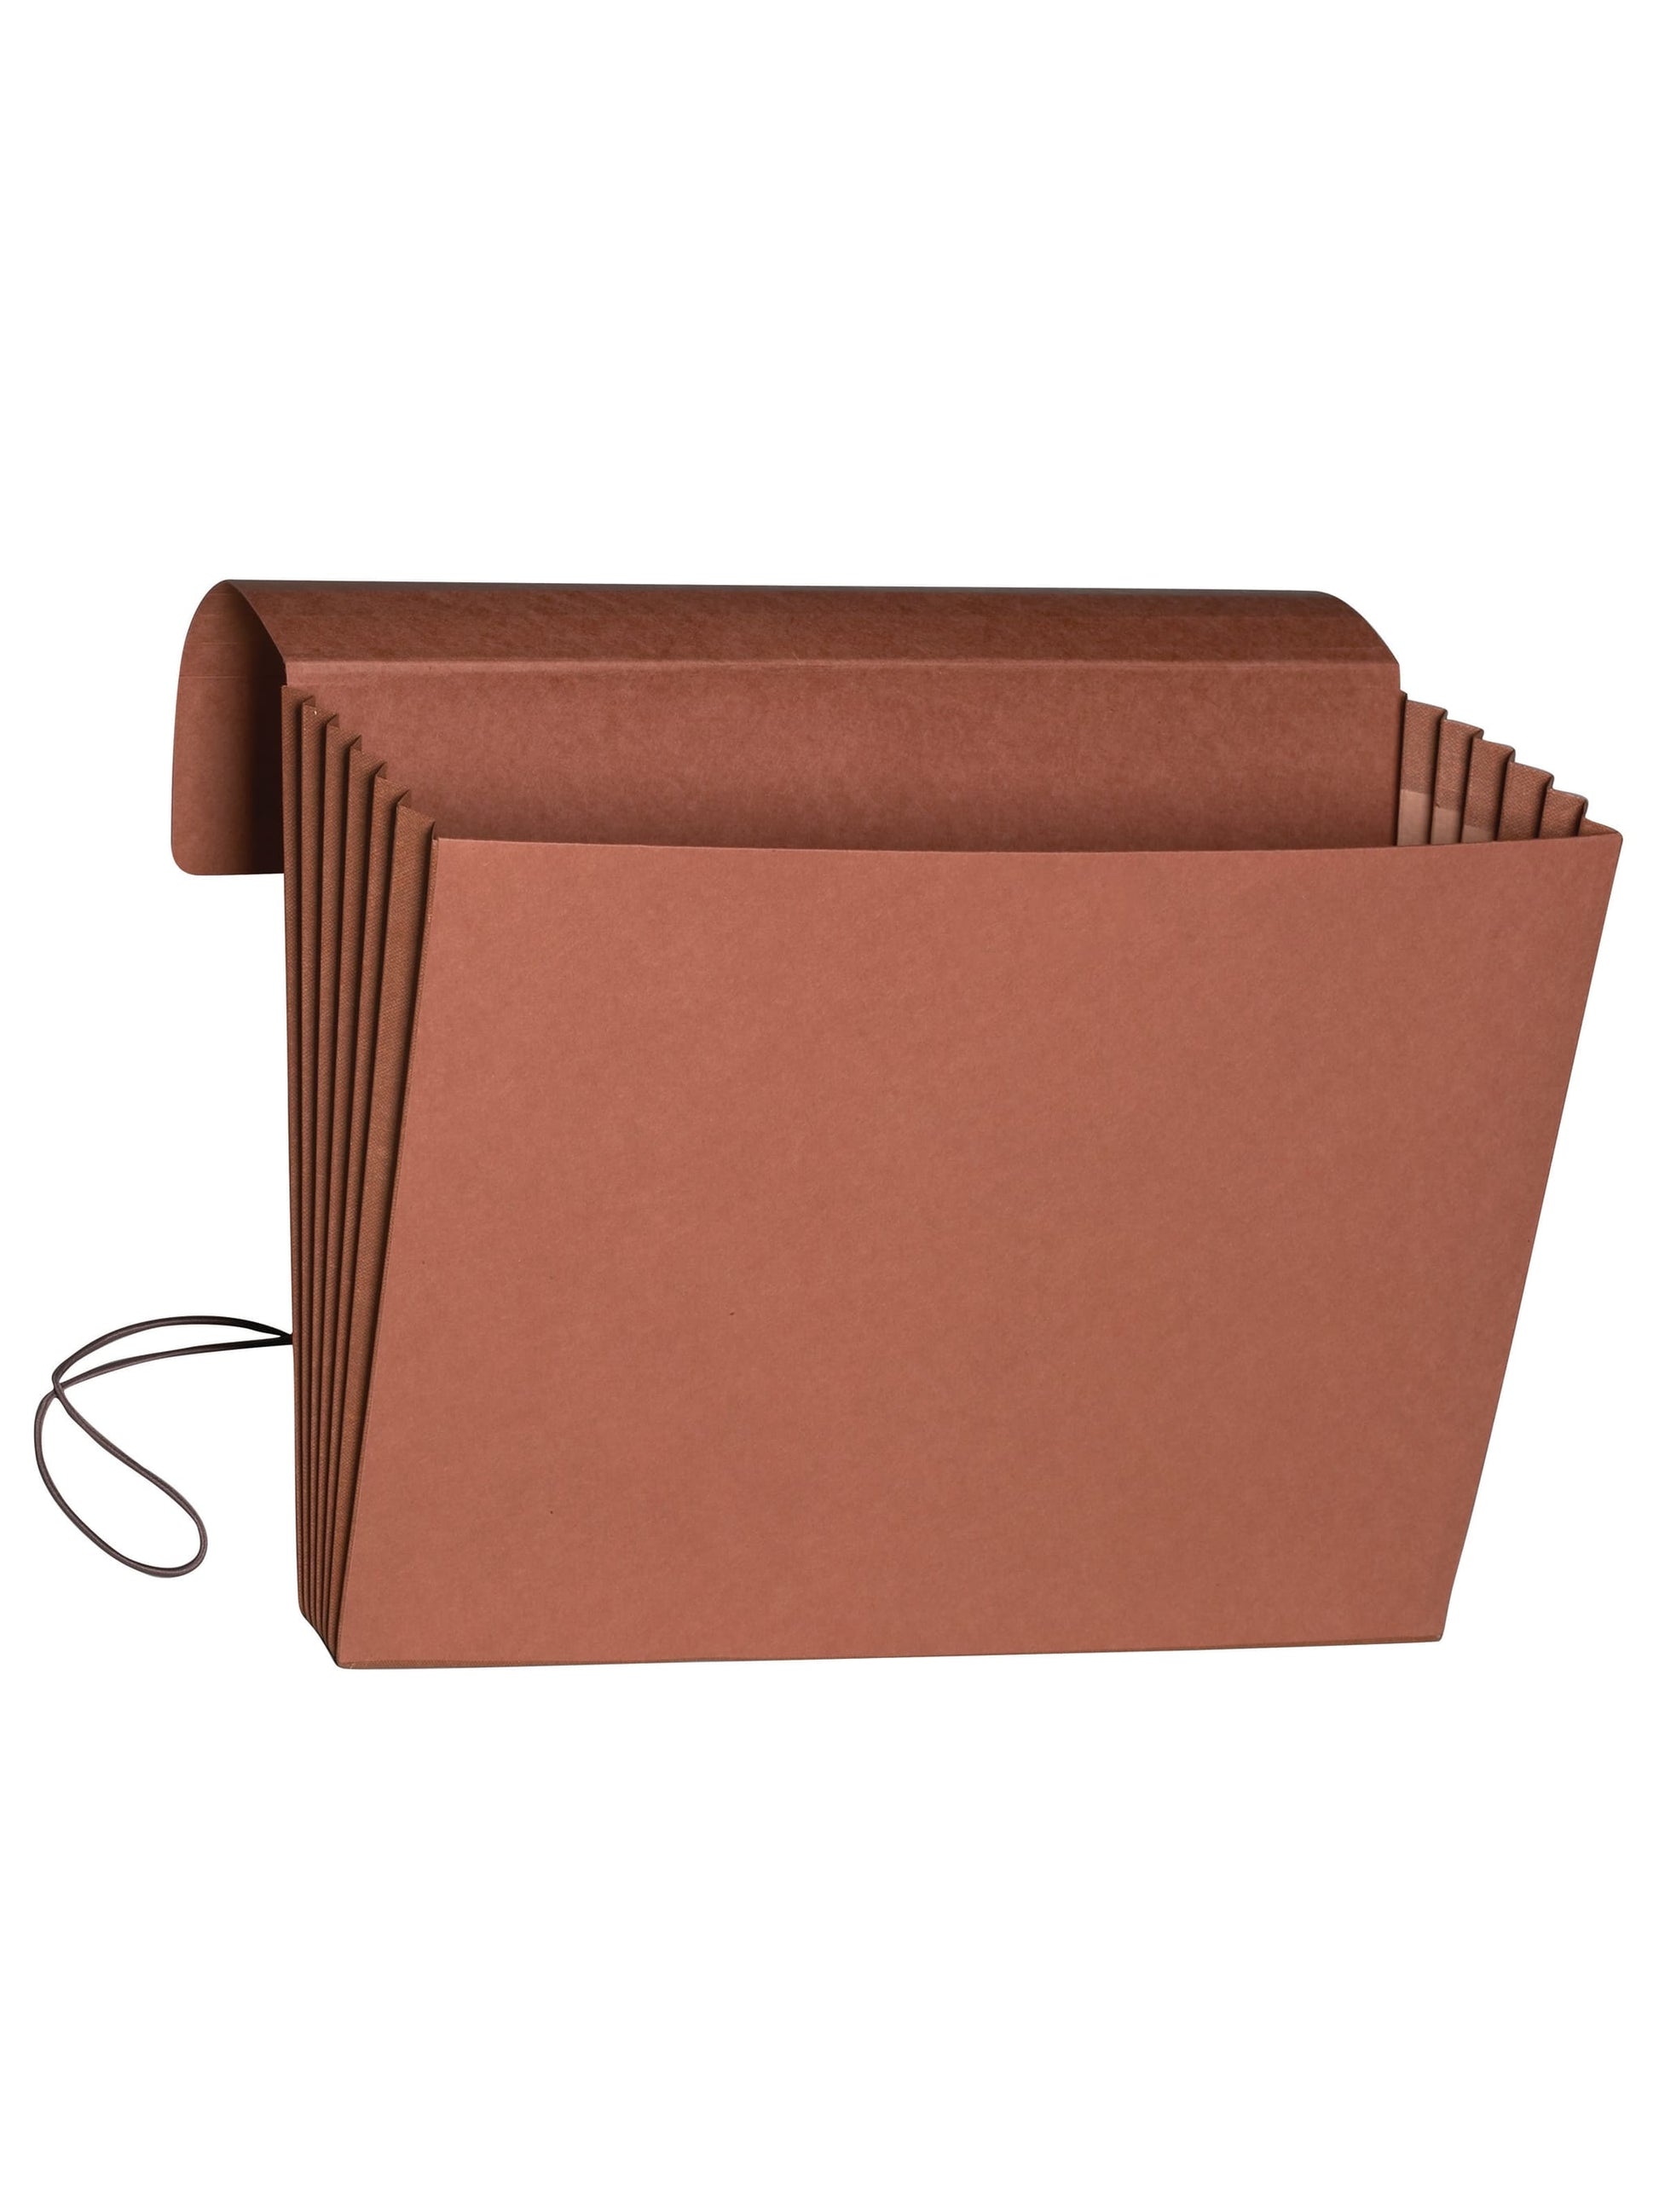 Extra Wide Expanding Wallets with Elastic Cord, 5-1/4 Inch Expansion, Redrope Color, Extra Wide Legal Size, Set of 0, 30086486711891